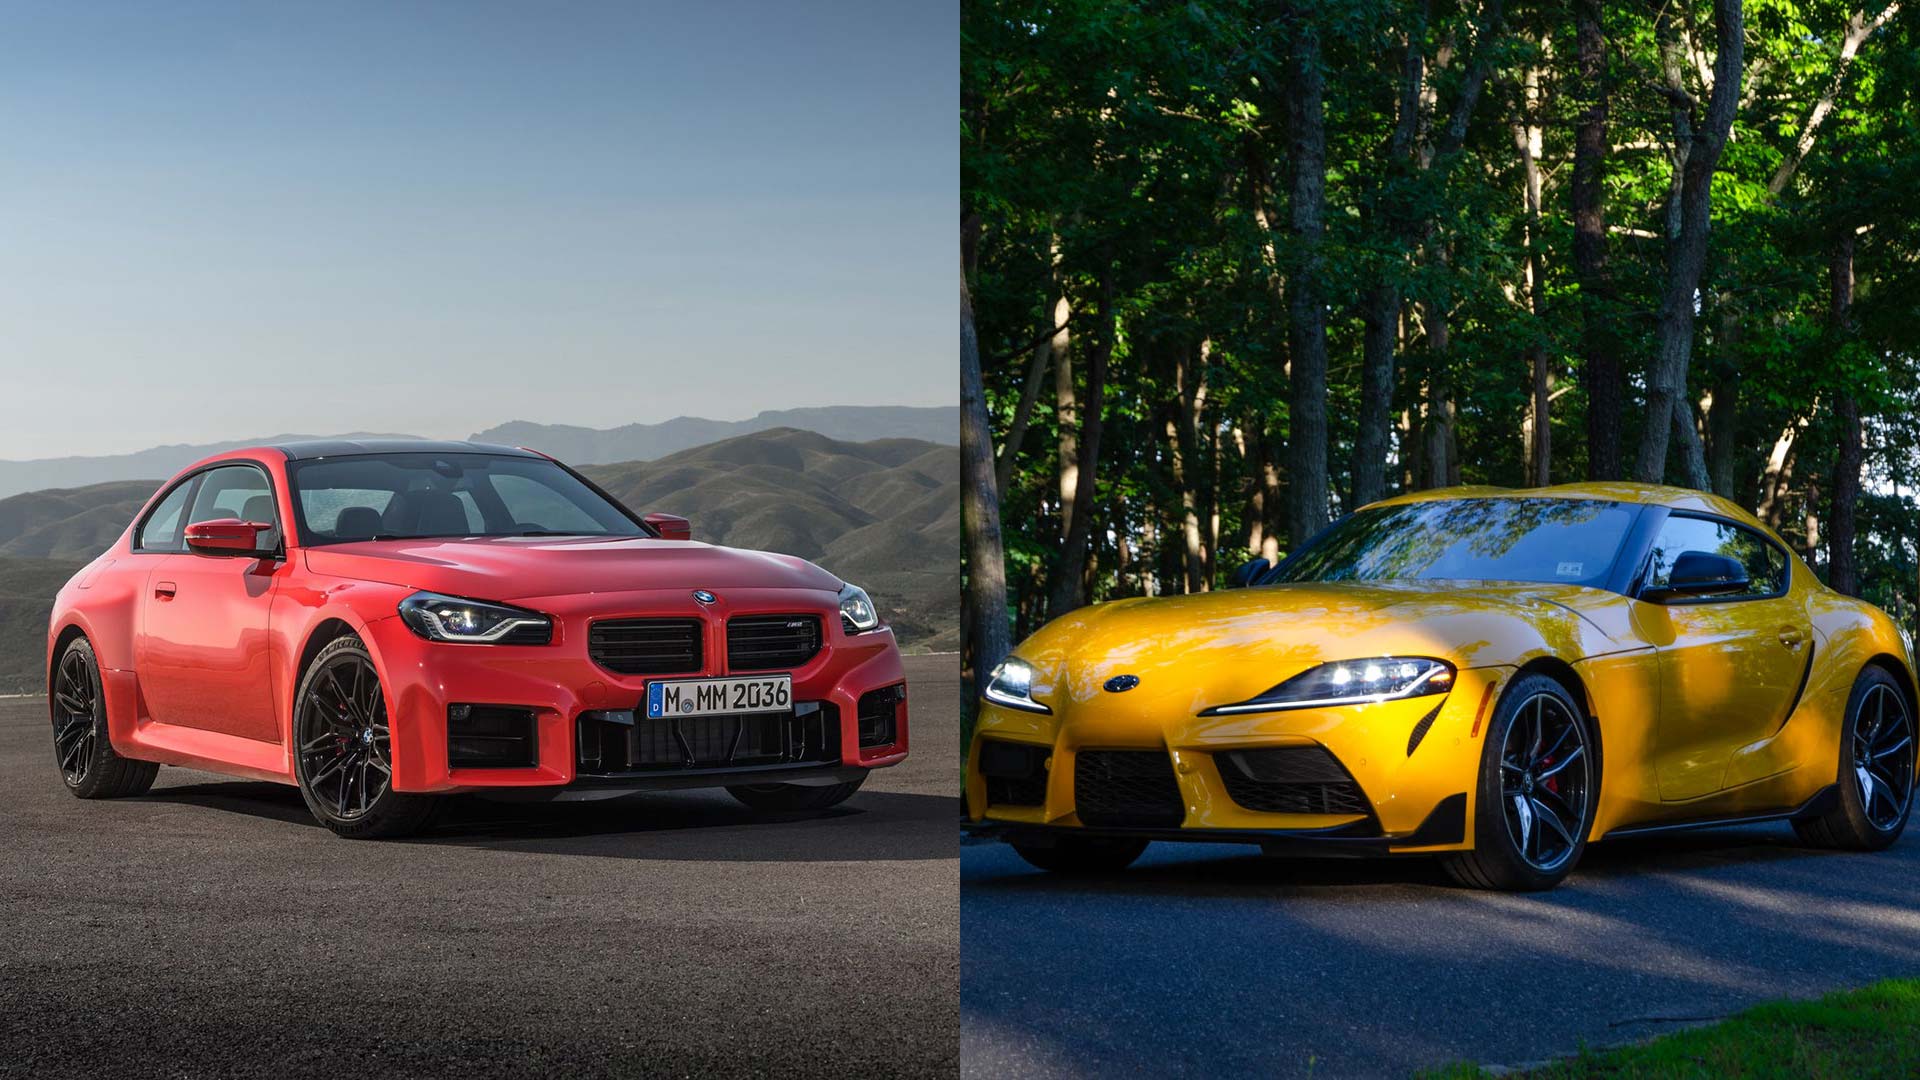 Which Manual is the Better Value?